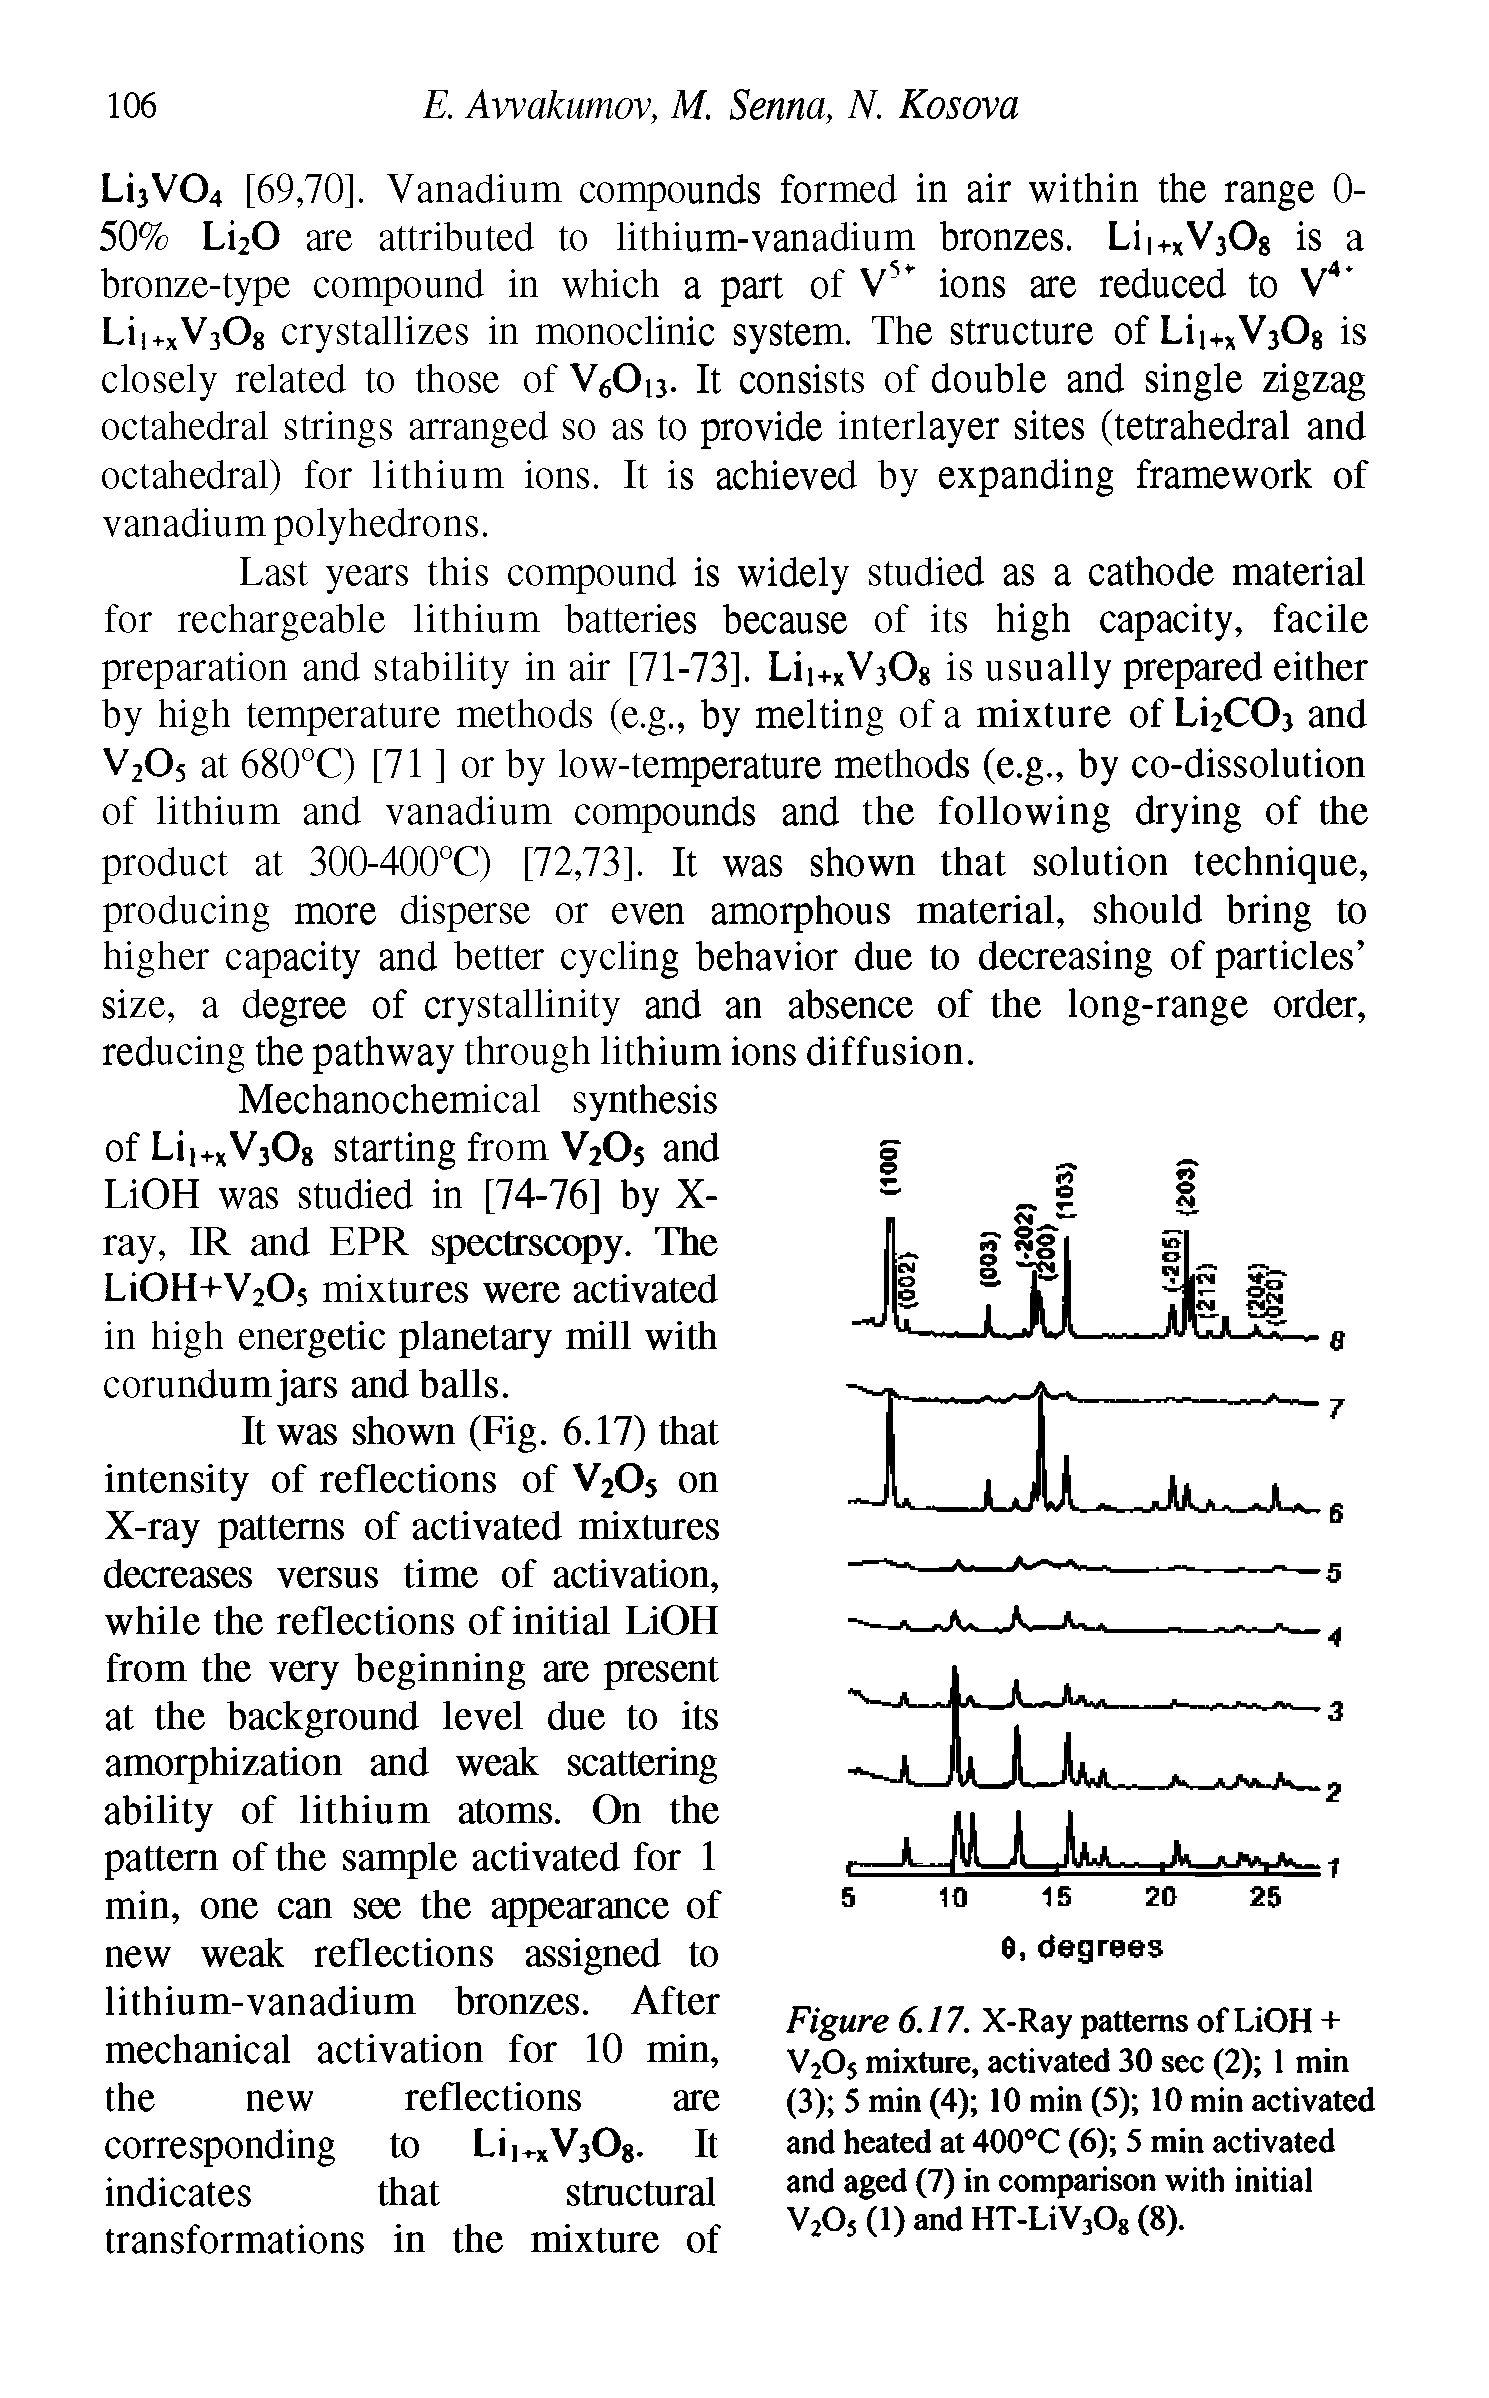 Figure 6.17. X-Ray patterns of LiOH + V2O5 mixture, activated 30 sec (2) 1 min (3) 5 min (4) 10 min (5) 10 min activated and heated at 400°C (6) 5 min activated and aged (7) in comparison with initial V2O5 (1) and HT-LiV30g (8).